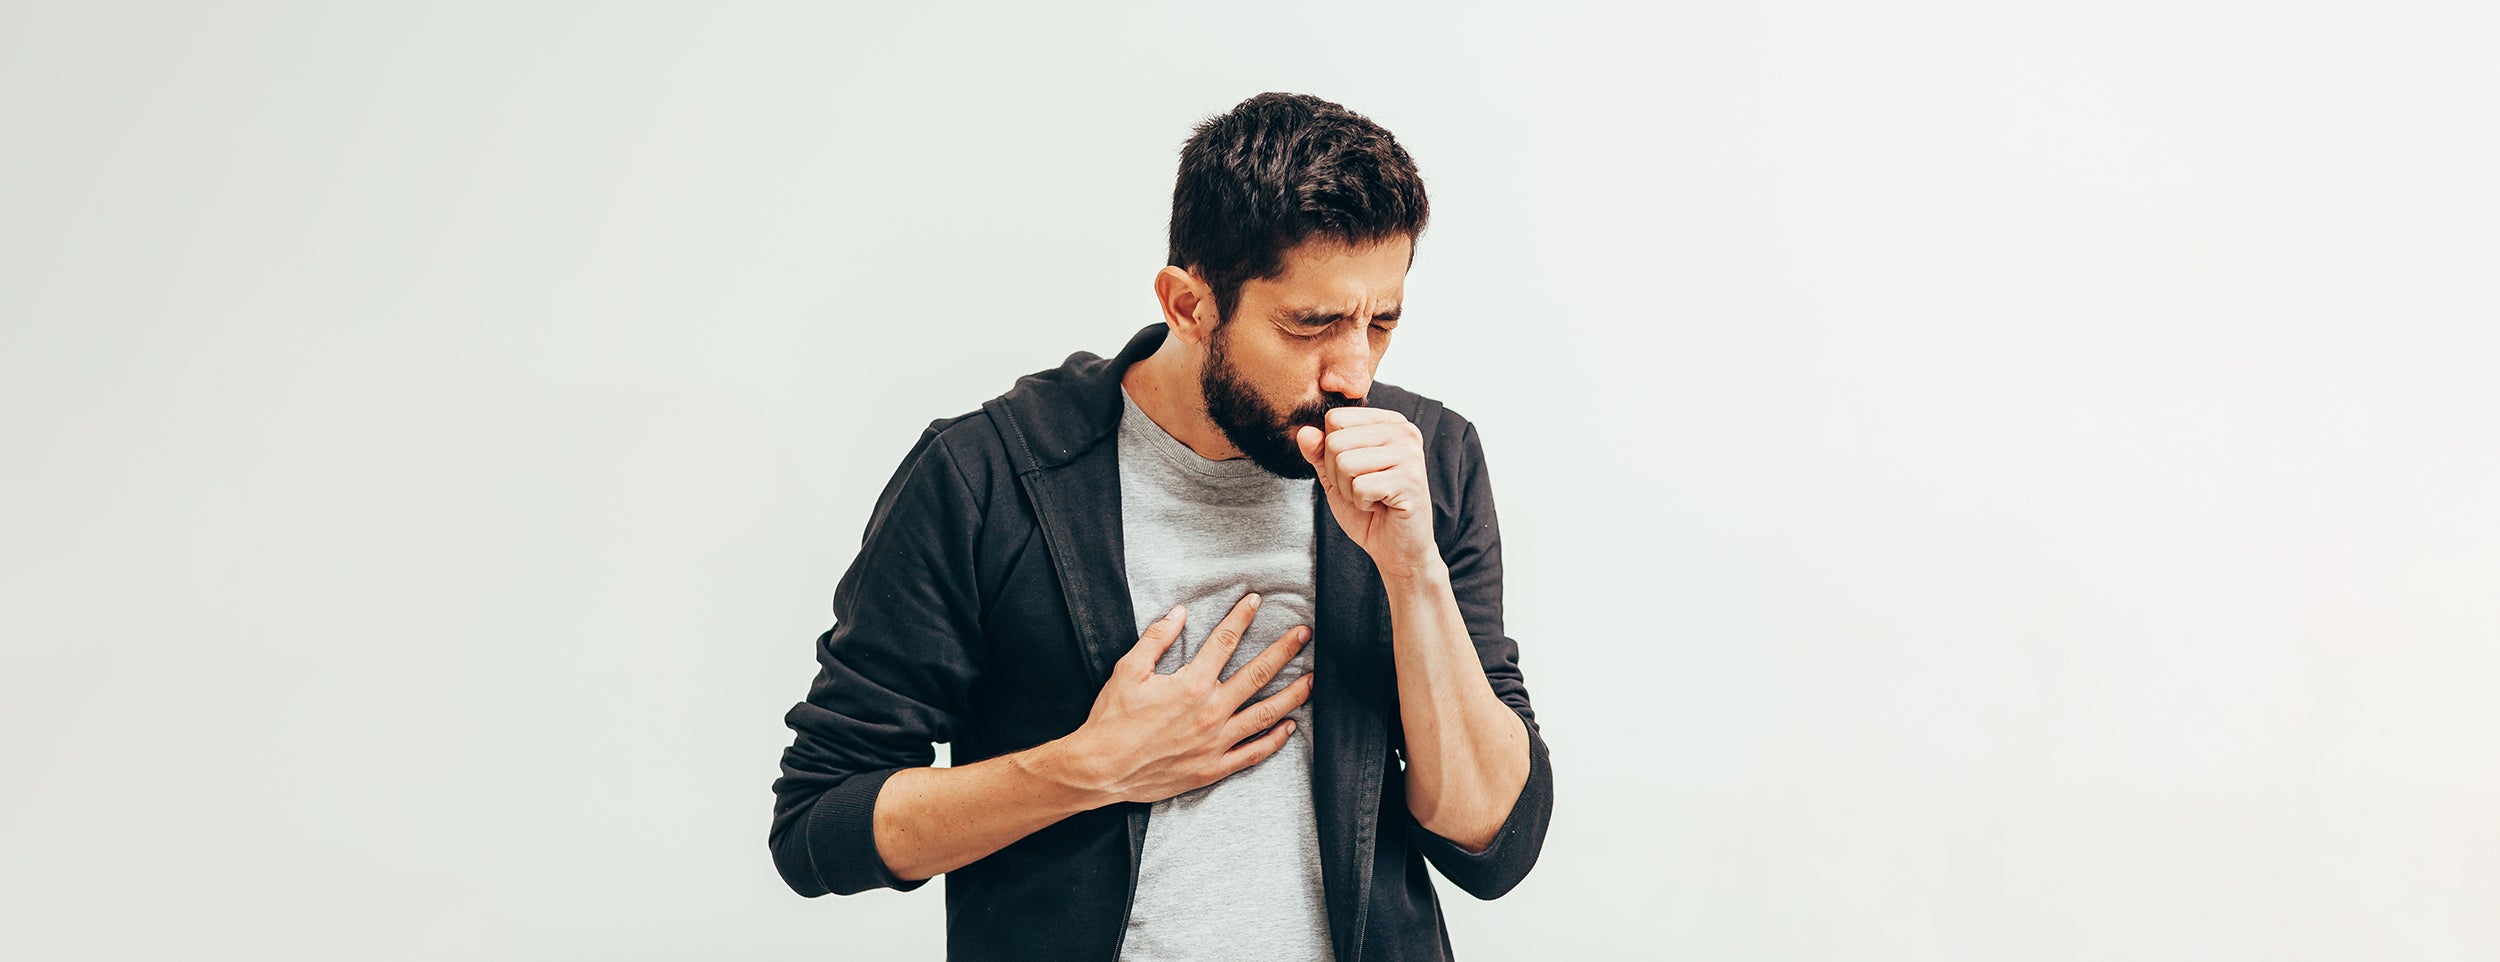 An overview of hemorrhoids and coughing